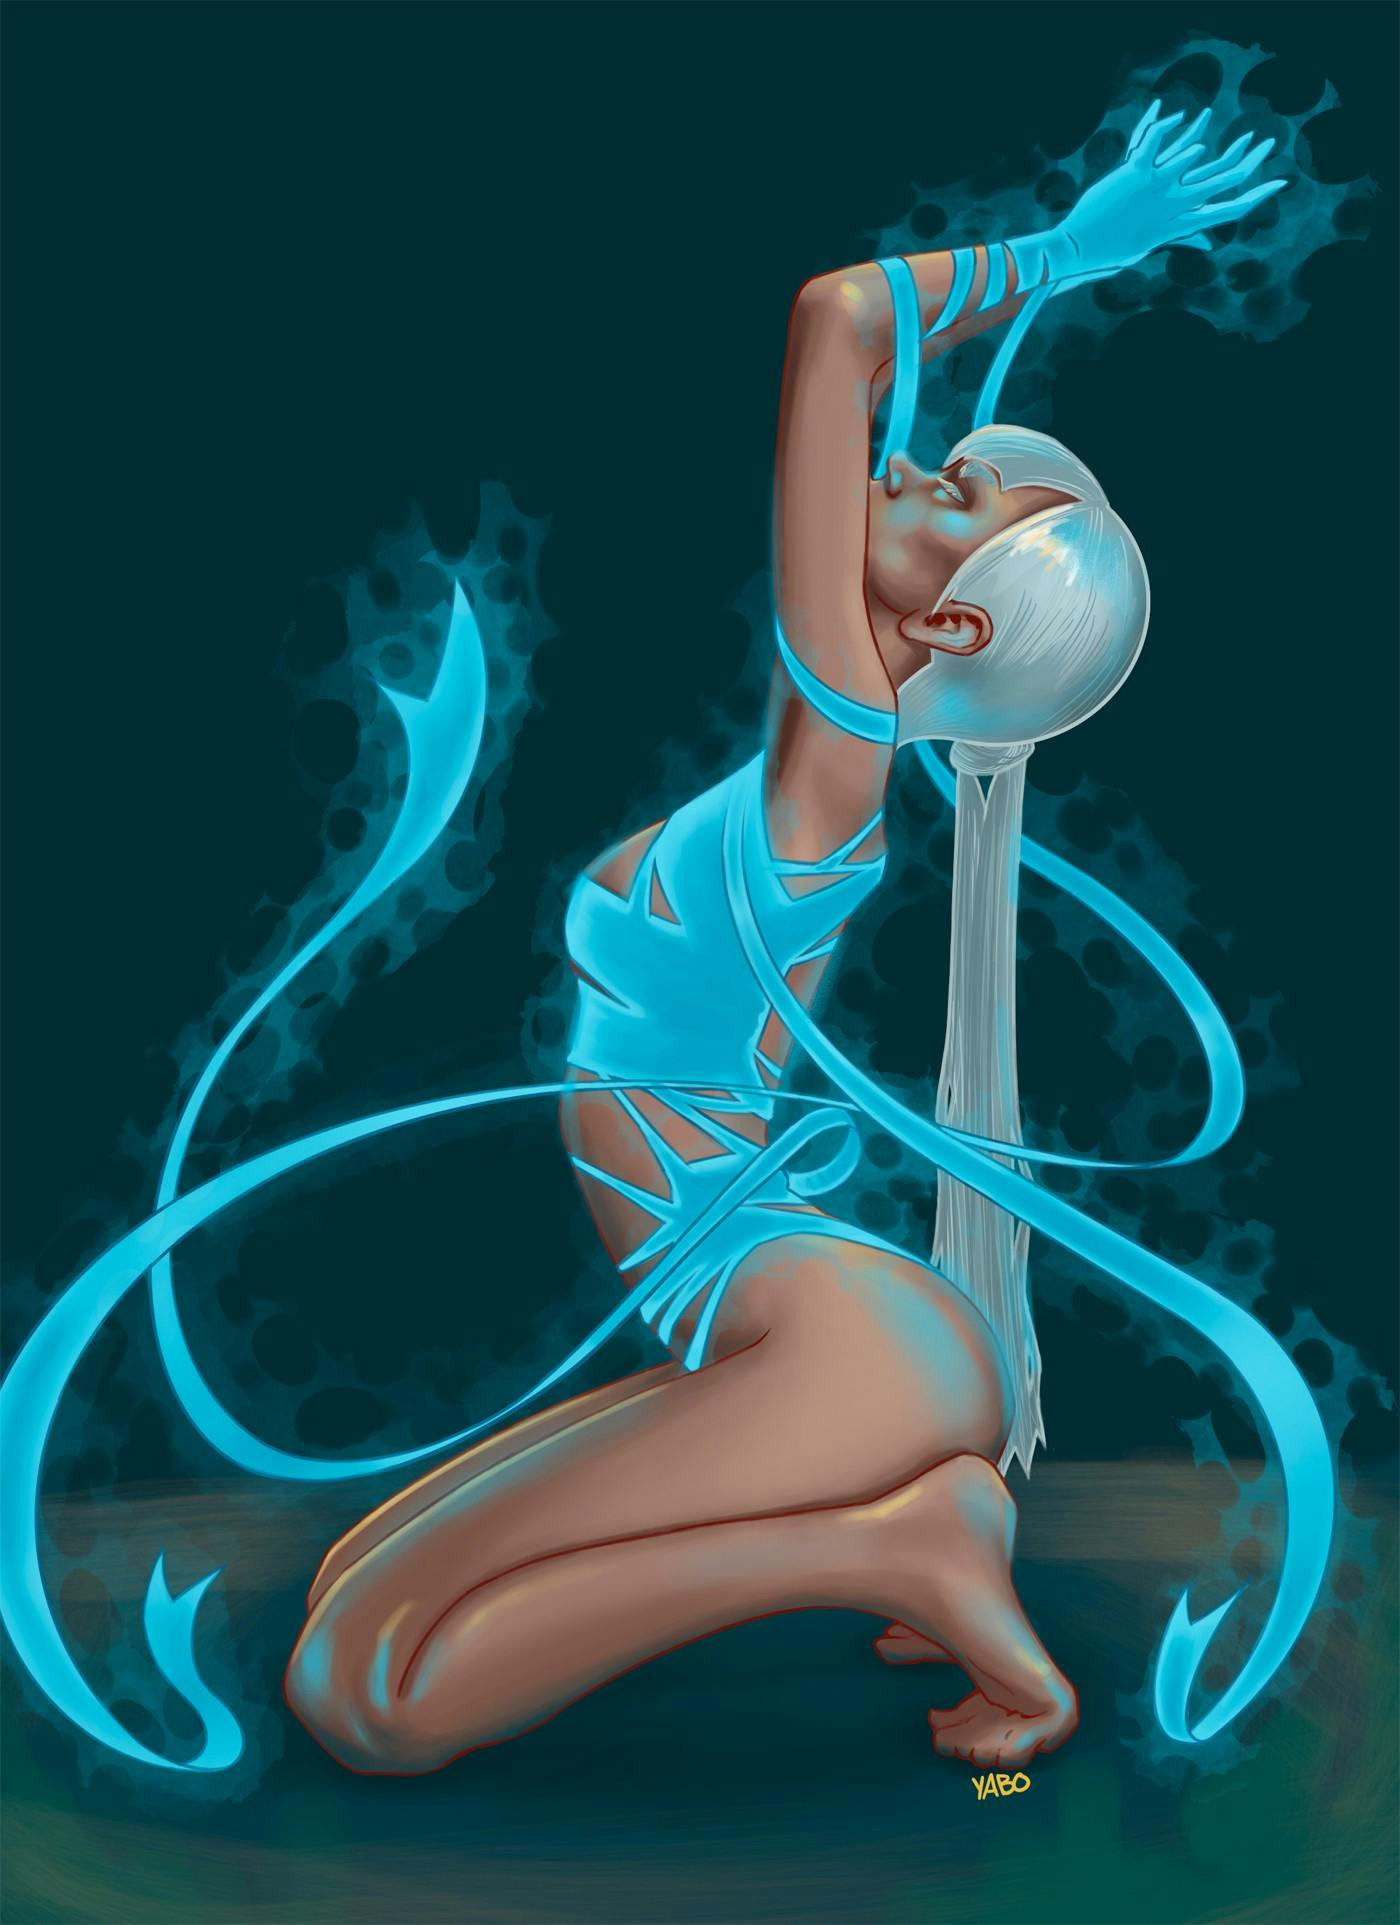 A digital illustration of a woman in profile, kneeling on the ground, her back arched and her arms in the air; her clothing looks like a bathing suit that is magically wrapping around her, glowing in blue.